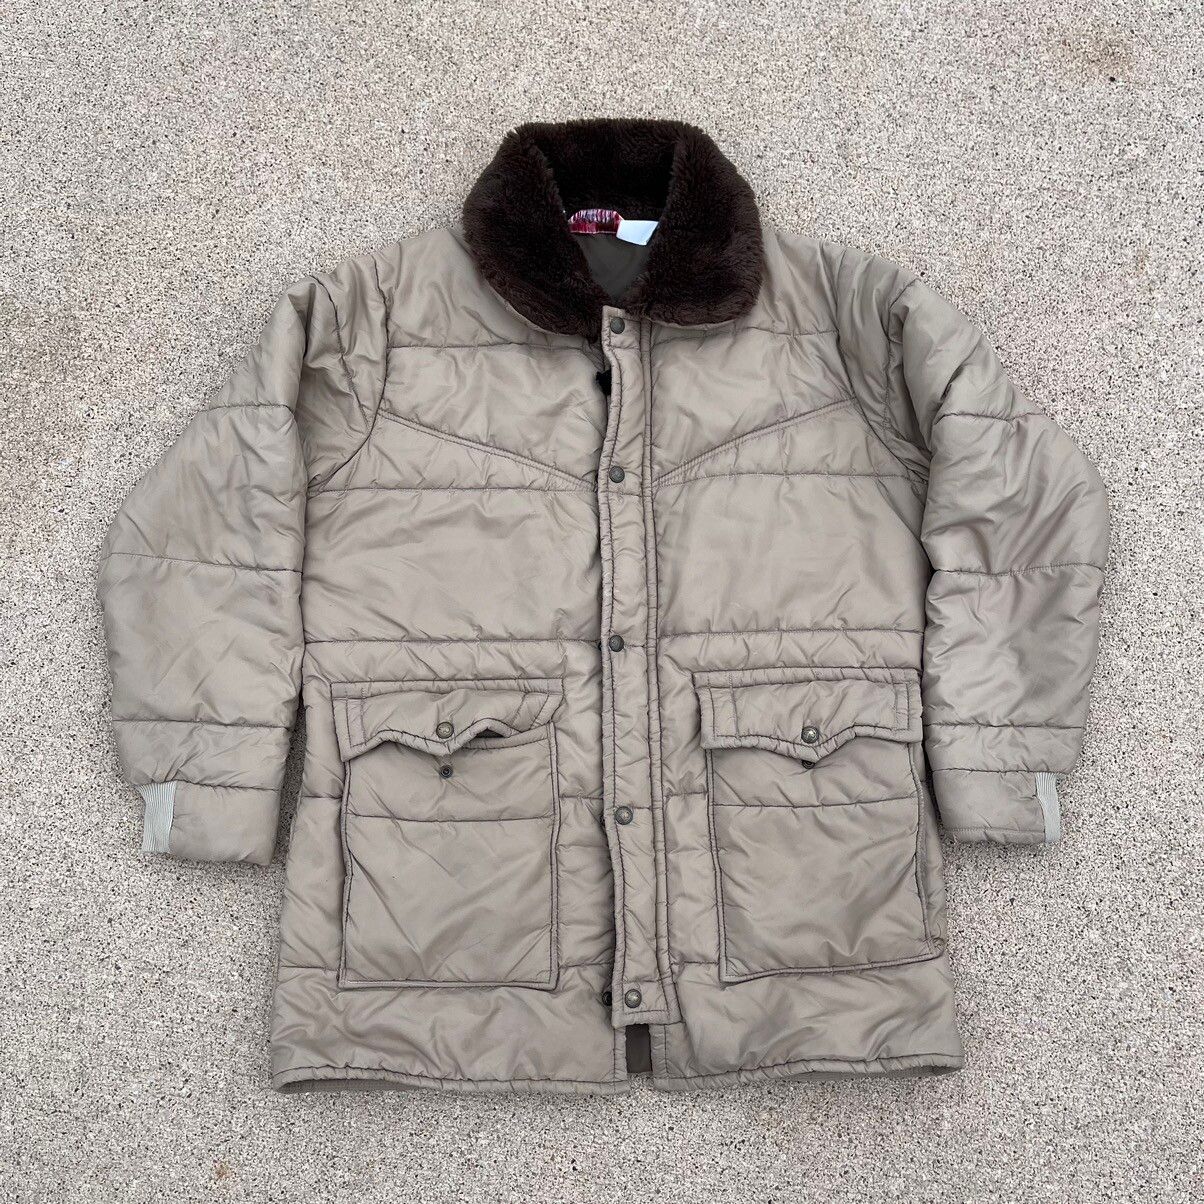 Vintage Vintage 90s Walls Blizzard-Pruf Puffer Insulated Jacket Tan ...